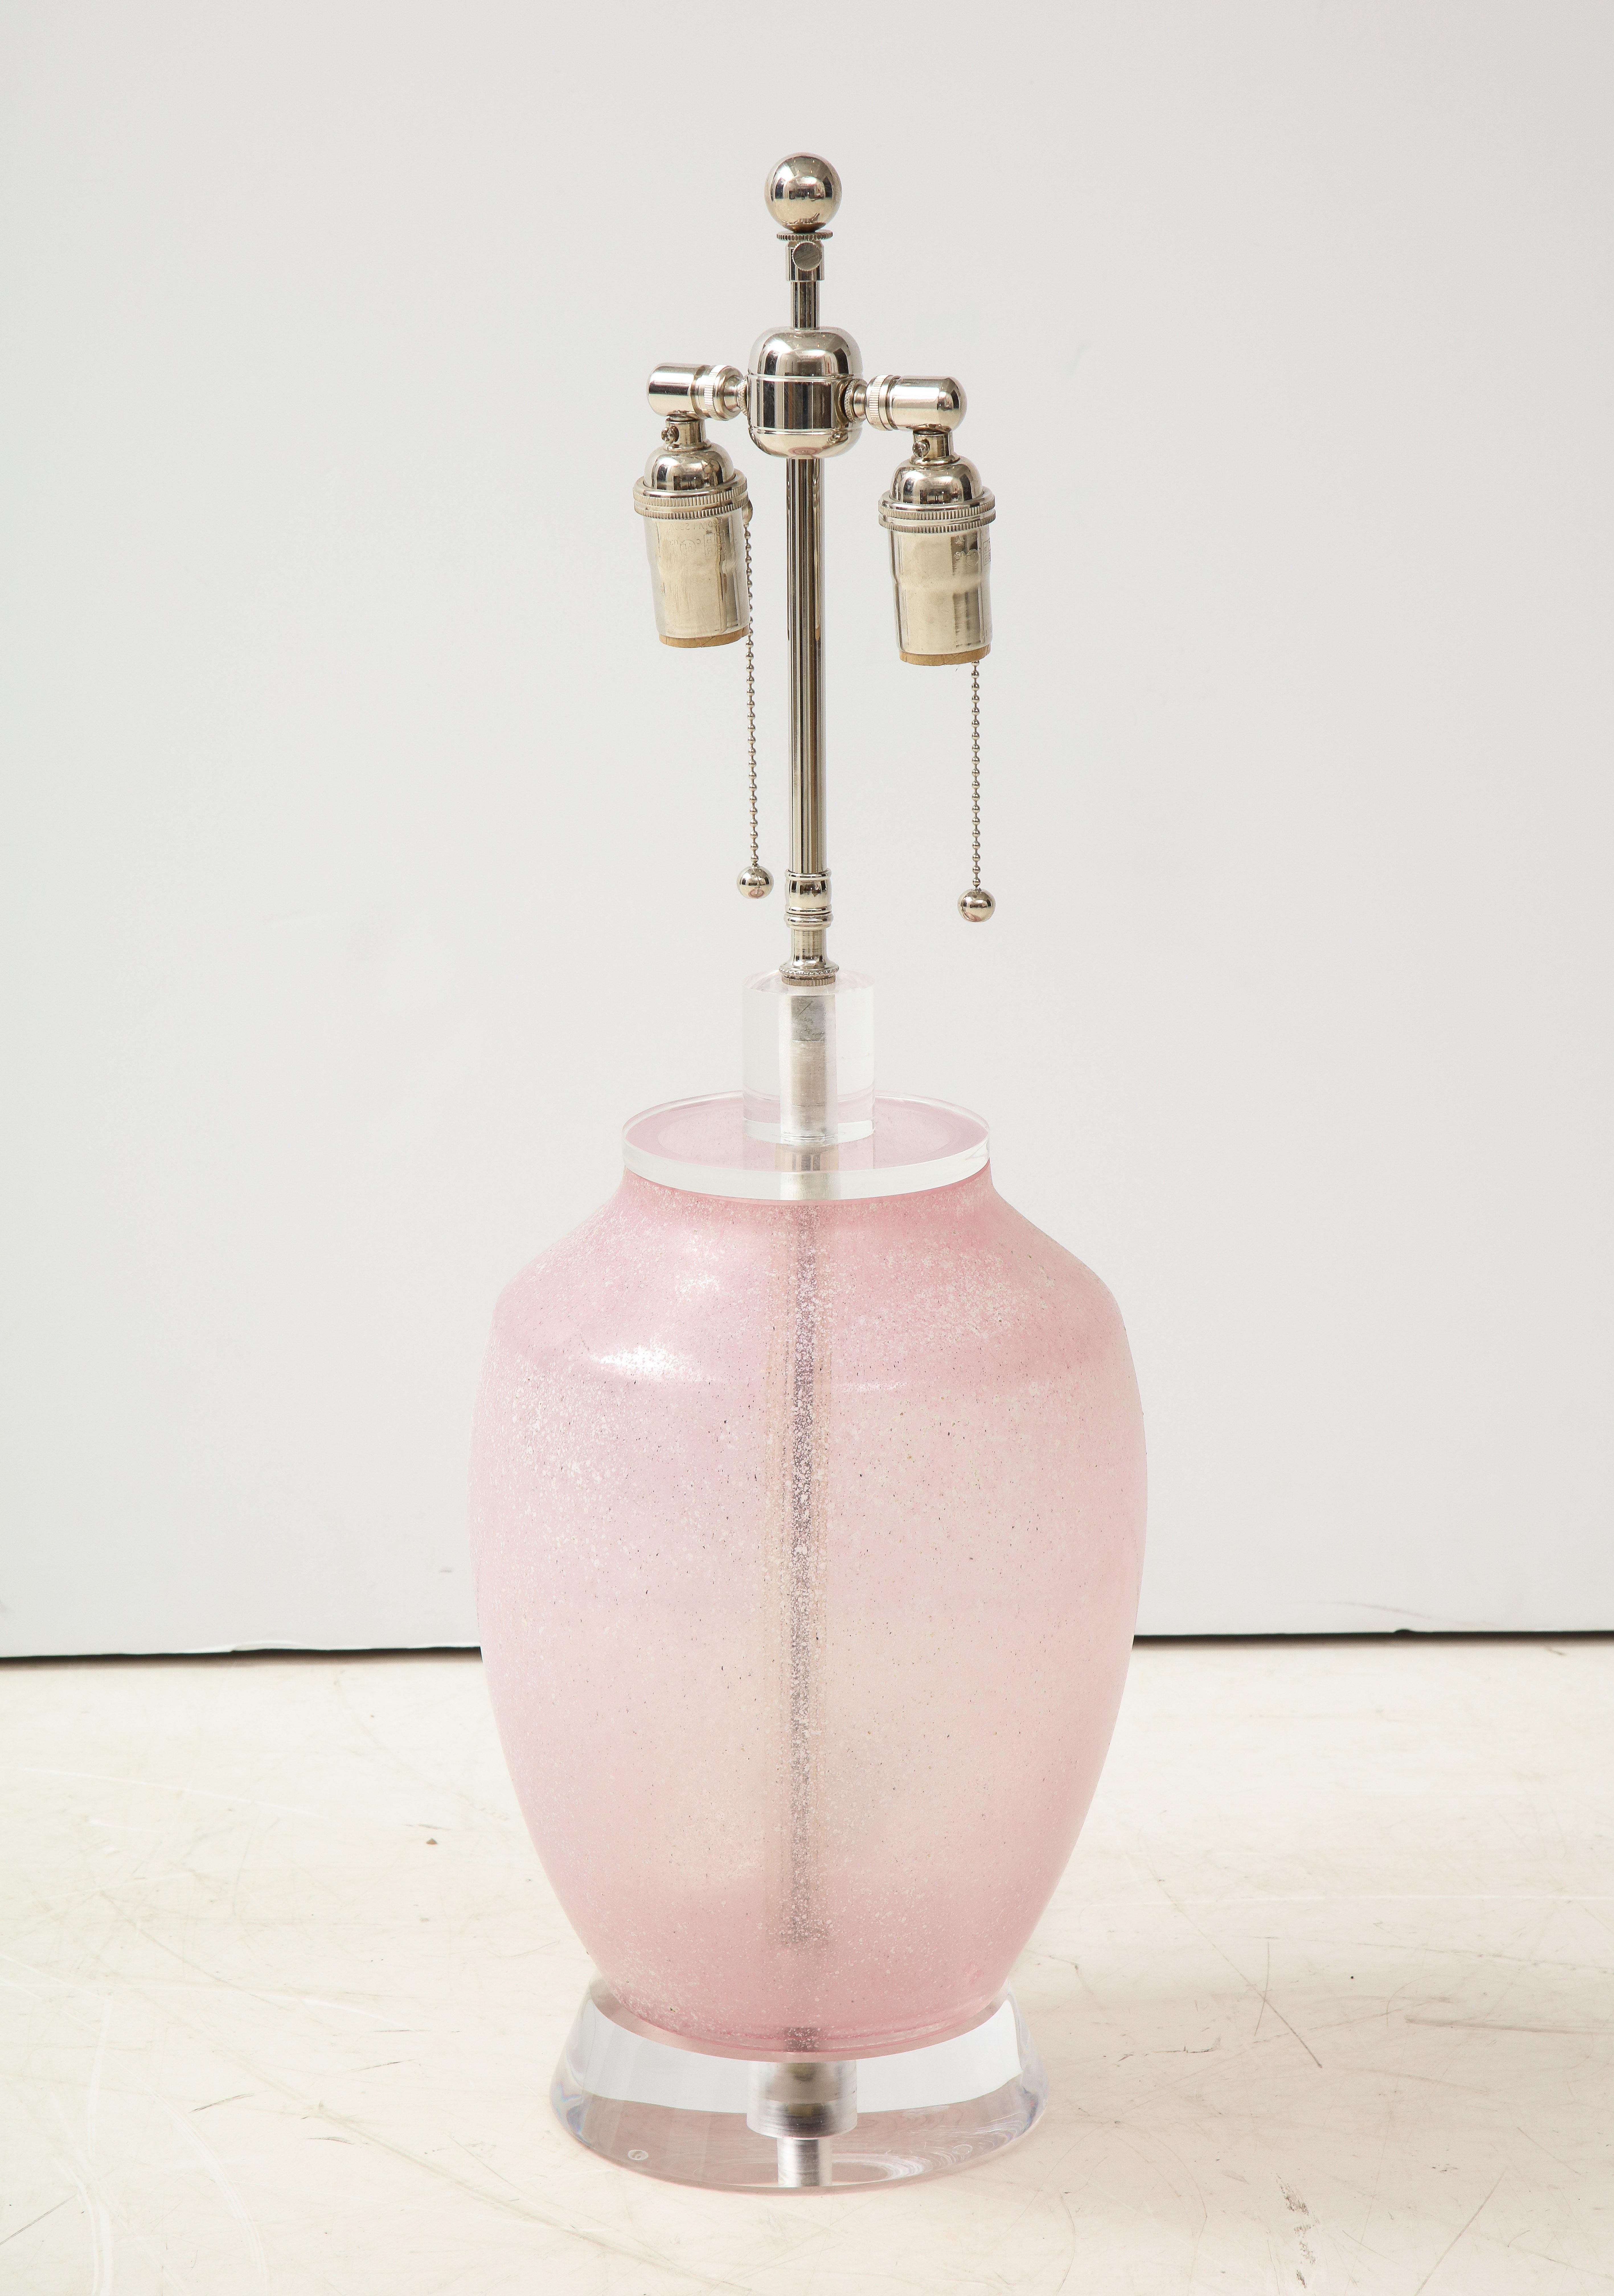 Large 1960's Cenedese lamp.
The pink lamp body which has a frosted textured finish sits
on a thick lucite base and has been Newly rewired with an adjustable 
polished nickel double cluster that takes standard light bulbs.